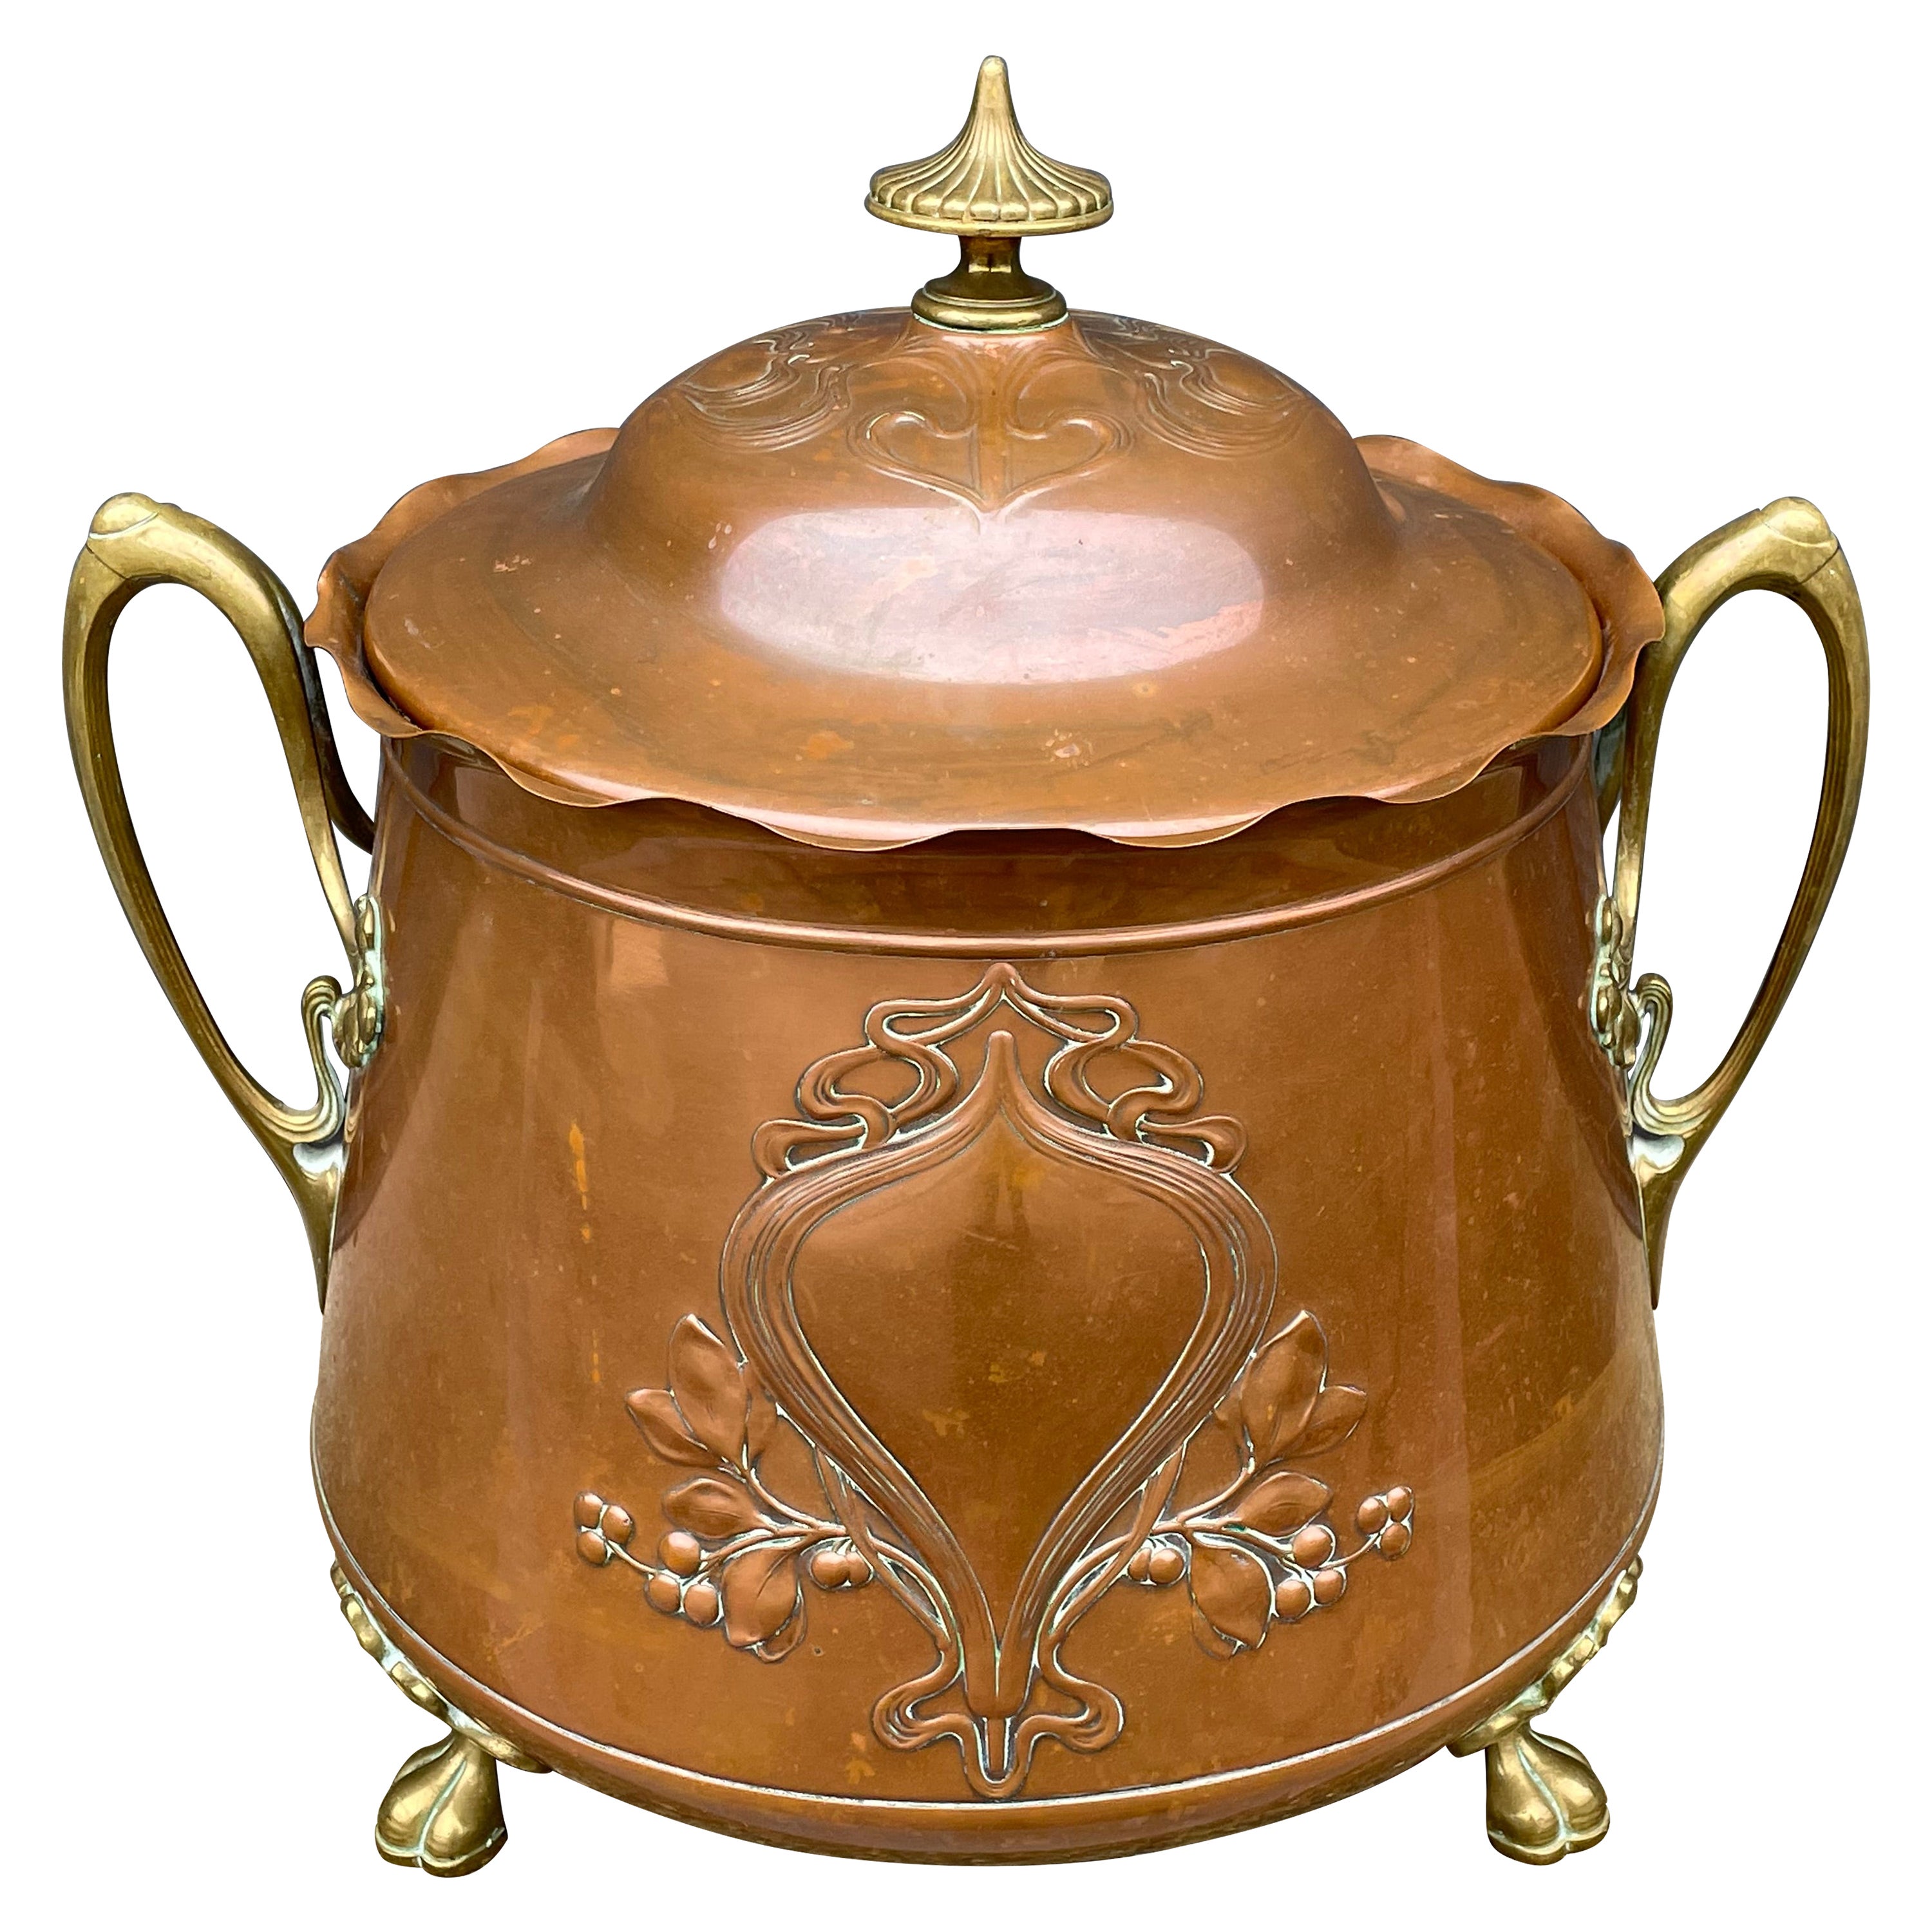 Rare Antique WMF Attr. Arts & Crafts Embossed Brass Coal Kettle /Firewood Bucket For Sale